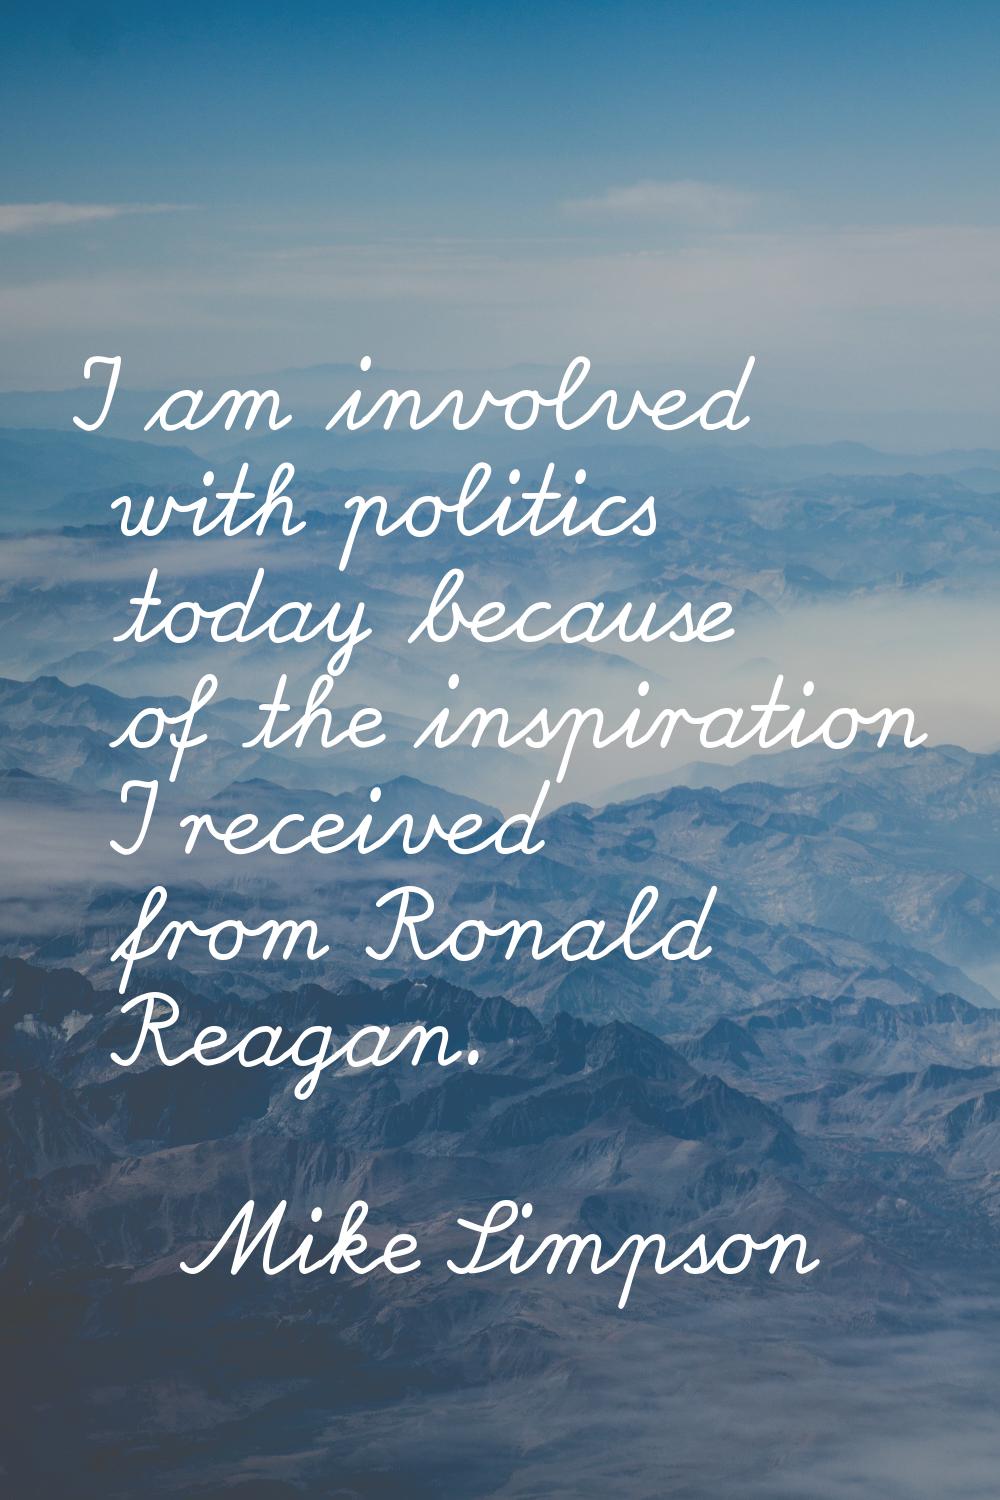 I am involved with politics today because of the inspiration I received from Ronald Reagan.